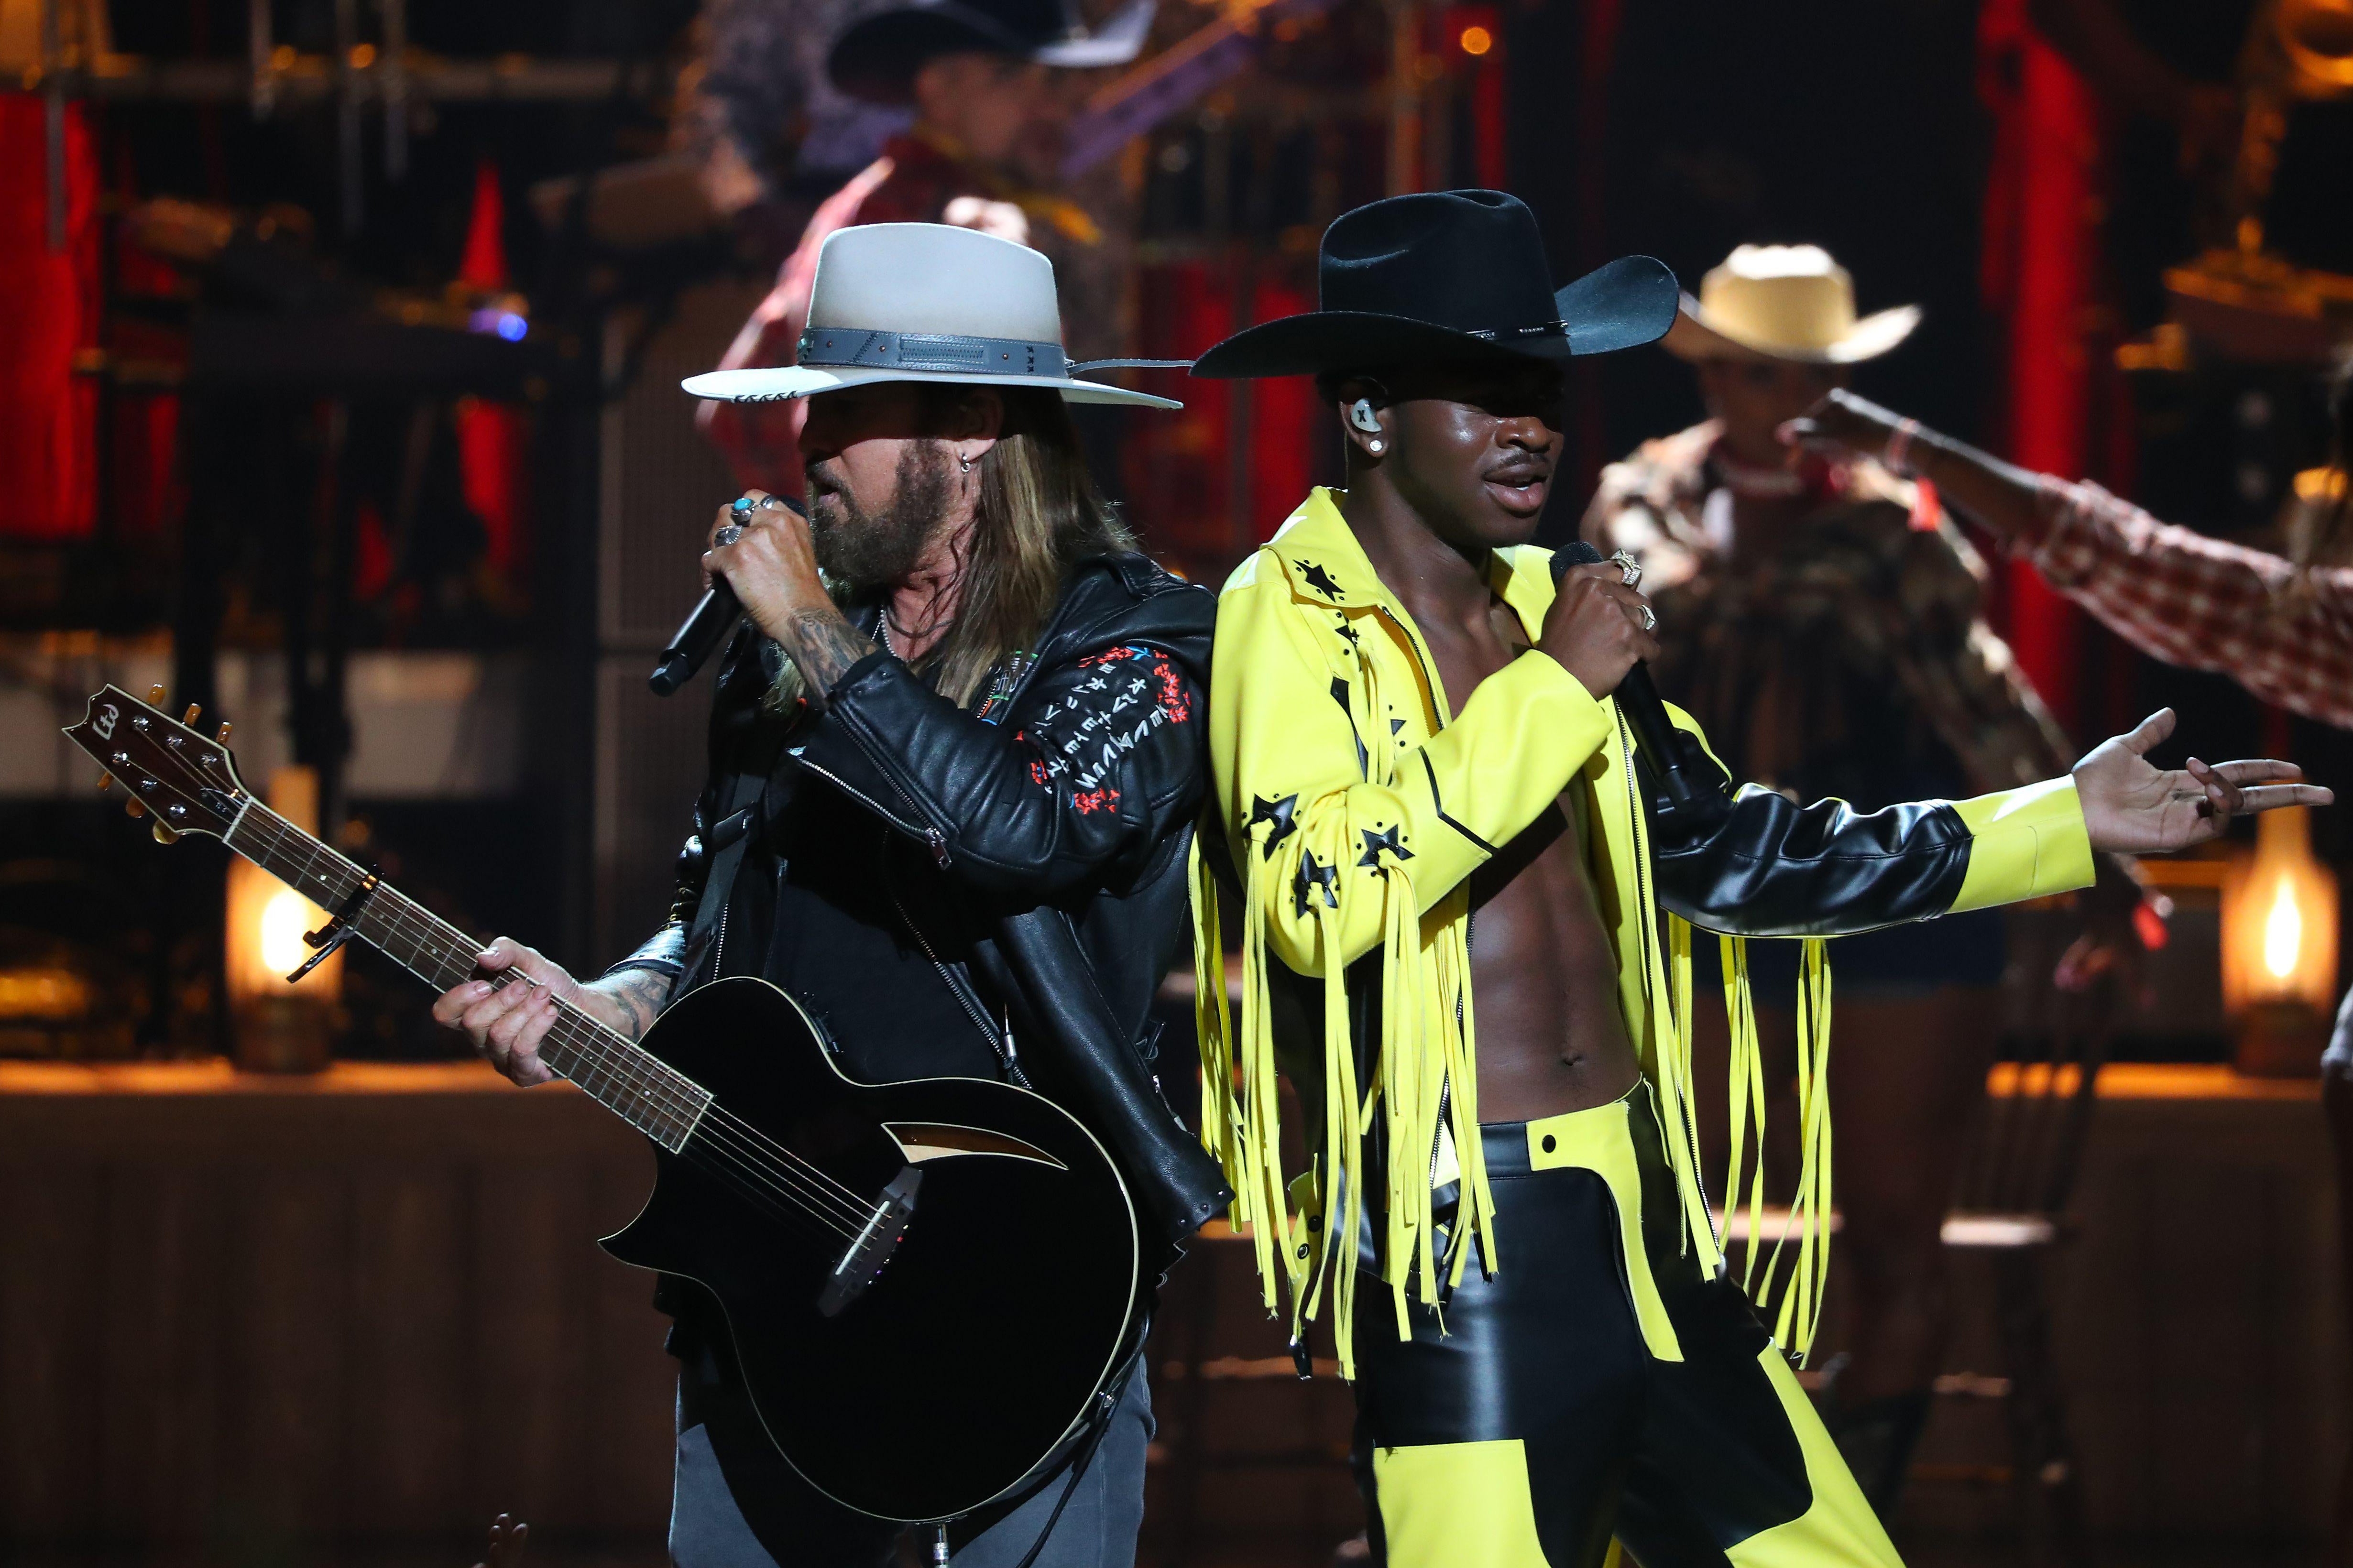 Billy Ray Cyrus (L) and Lil Nas X perform onstage during the 2019 BET awards at Microsoft Theater in Los Angeles, California on June 23, 2019. (Photo by Jean-Baptiste LACROIX / AFP)        (Photo credit should read JEAN-BAPTISTE LACROIX/AFP/Getty Images)